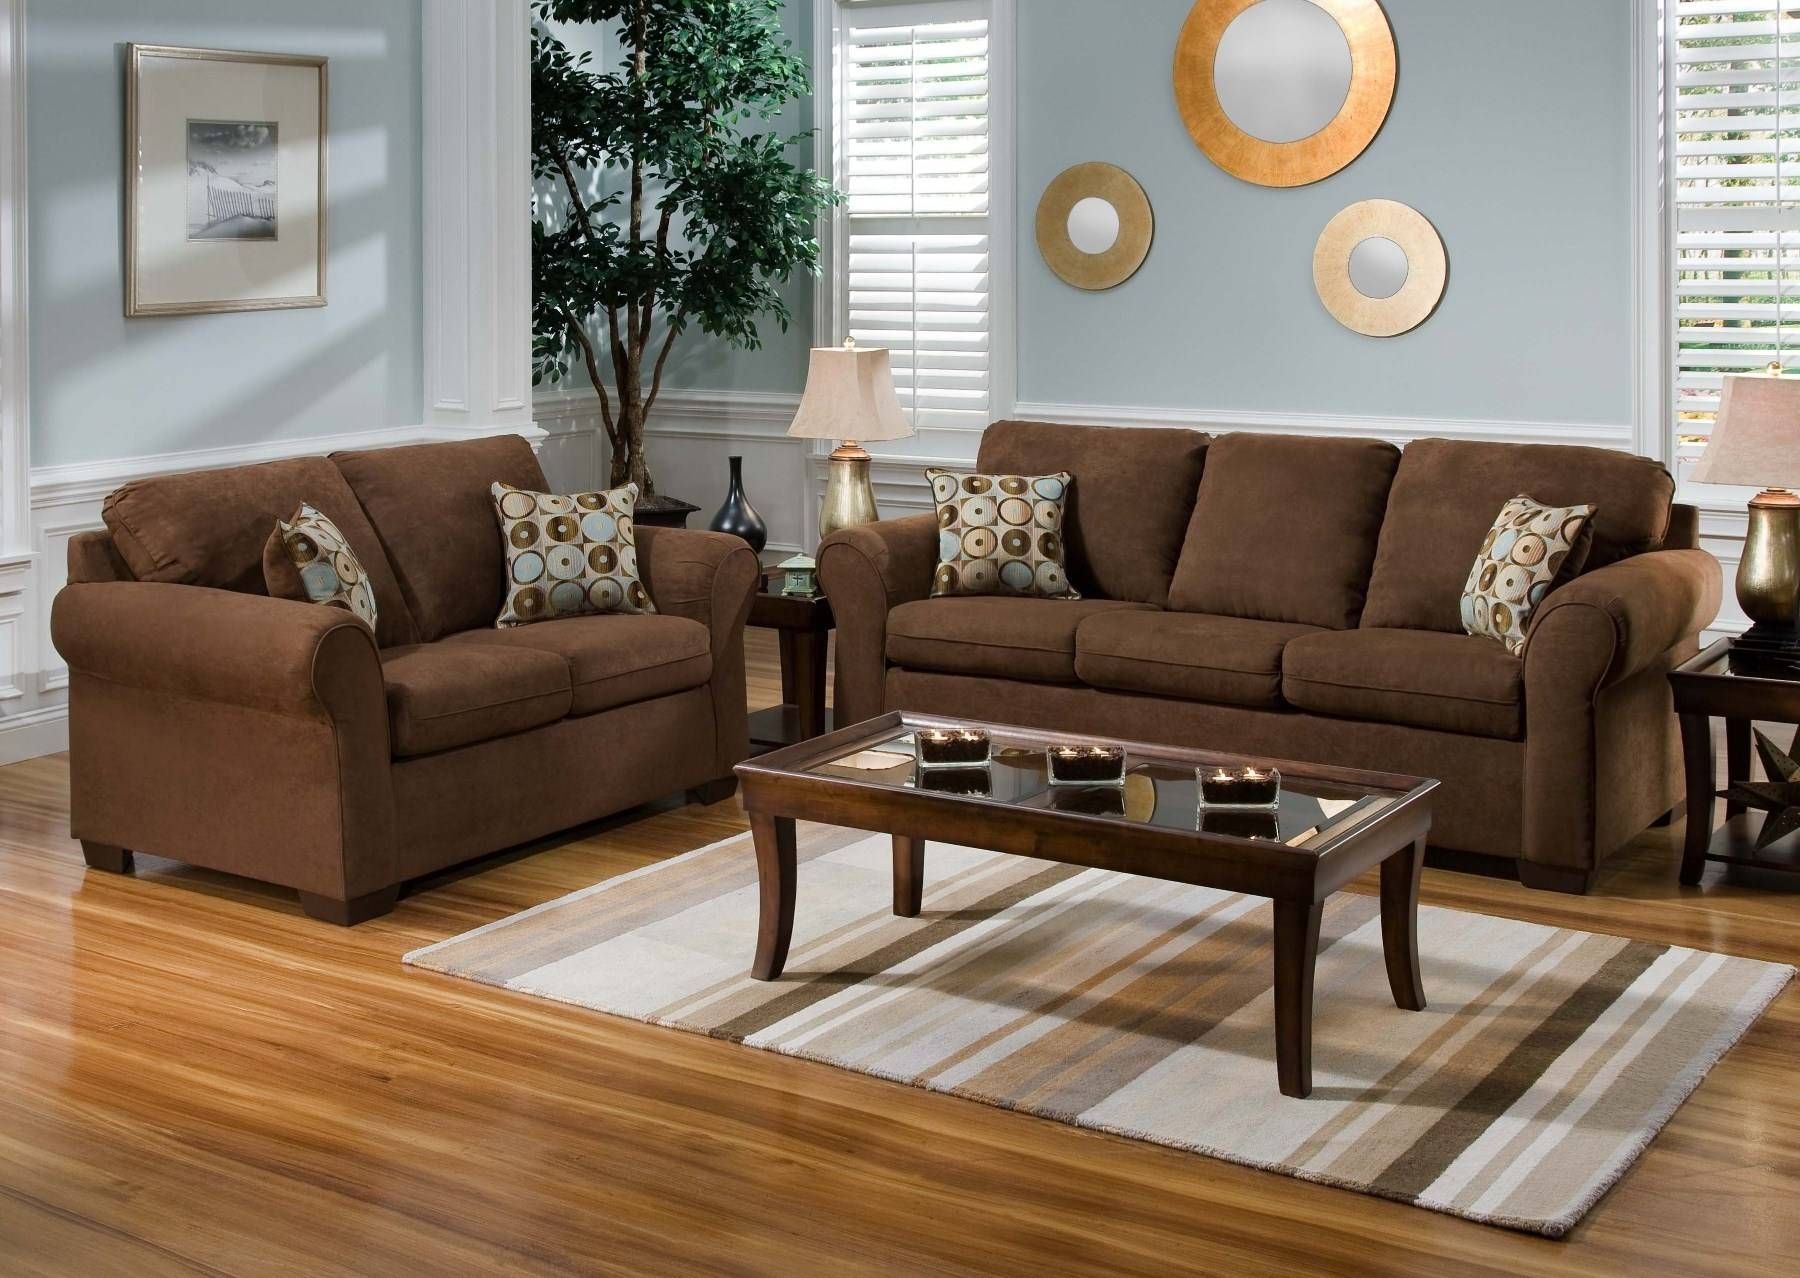 Tan Living Room Printed Armchairs Calming Color Schemes White Shag Within Comfy Floor Seating (View 24 of 30)